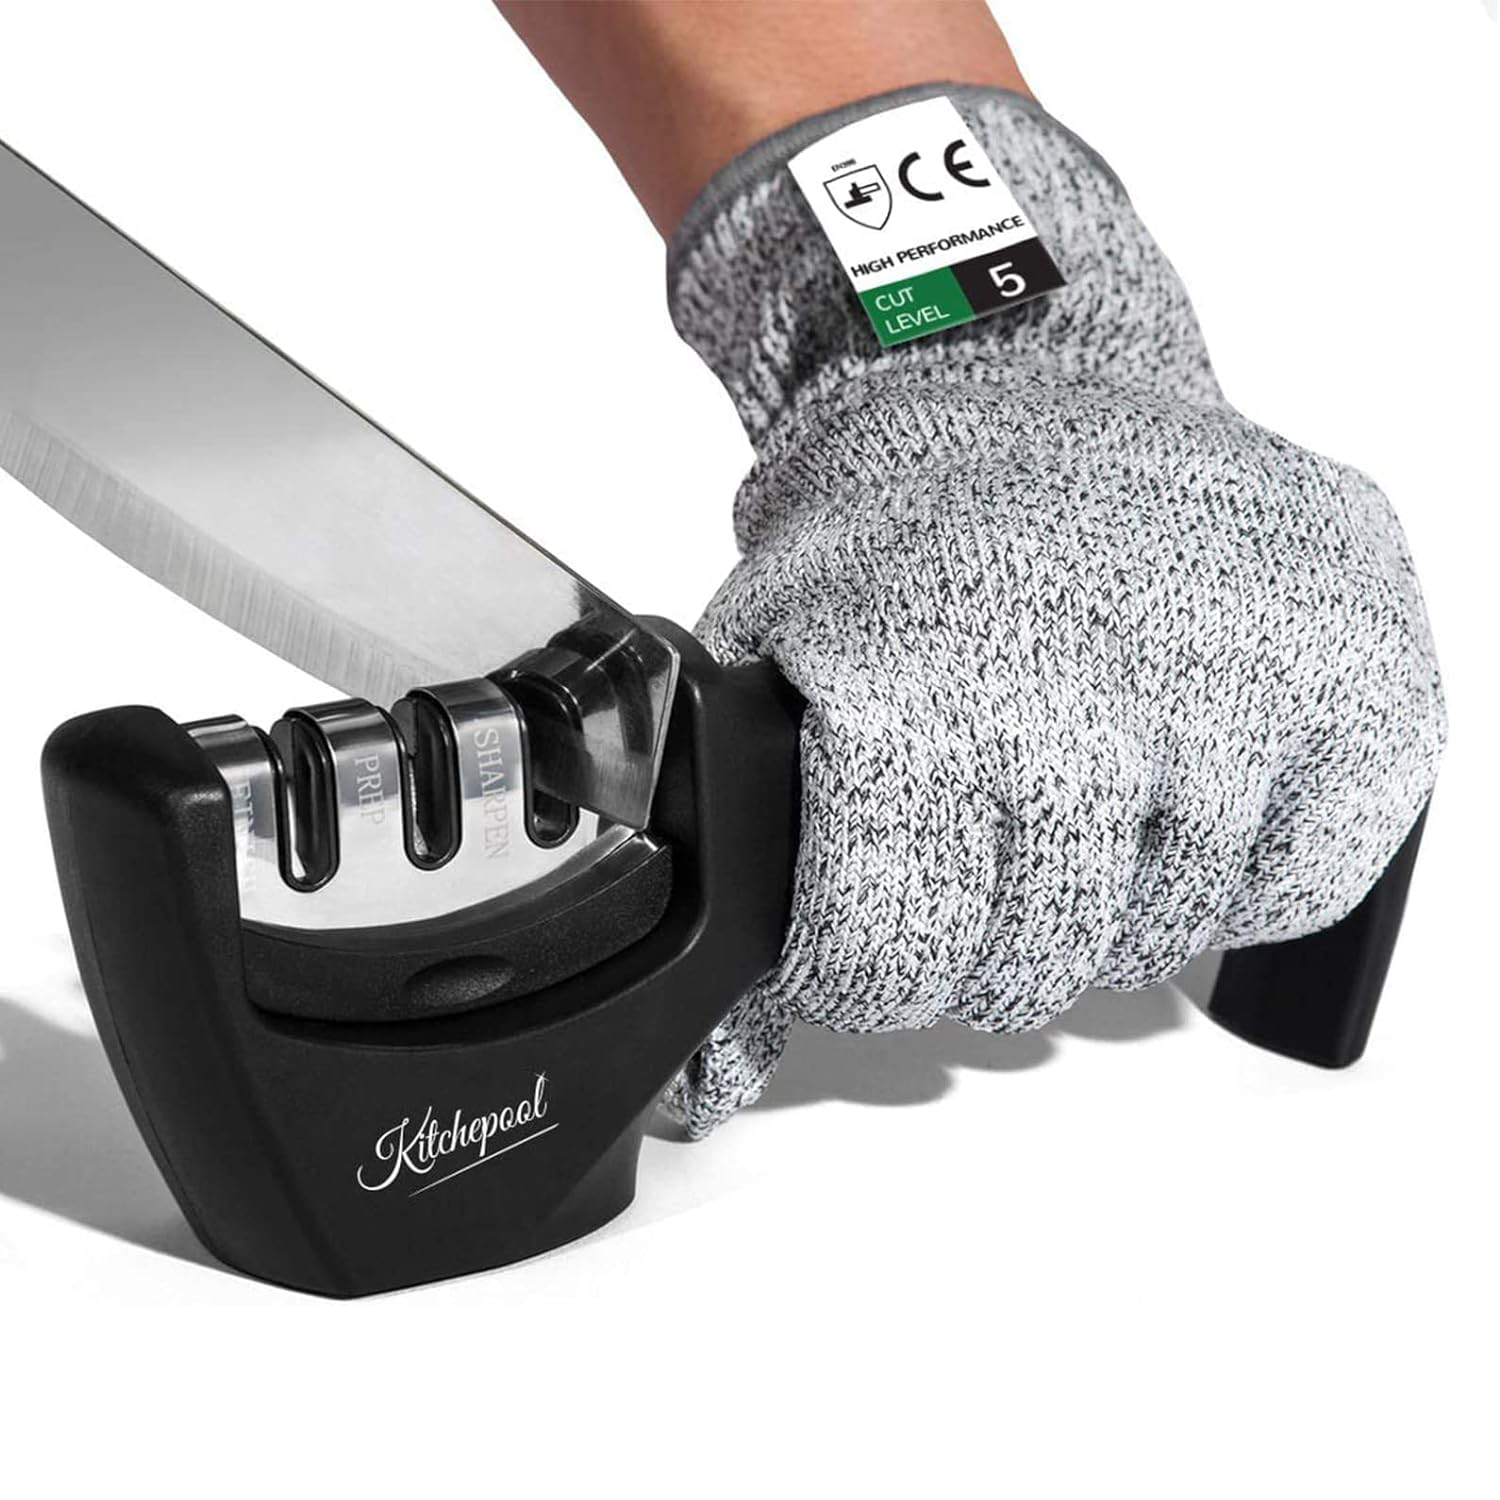 KD 4-in-1 Knife Sharpener Kit with Cut-Resistant Glove